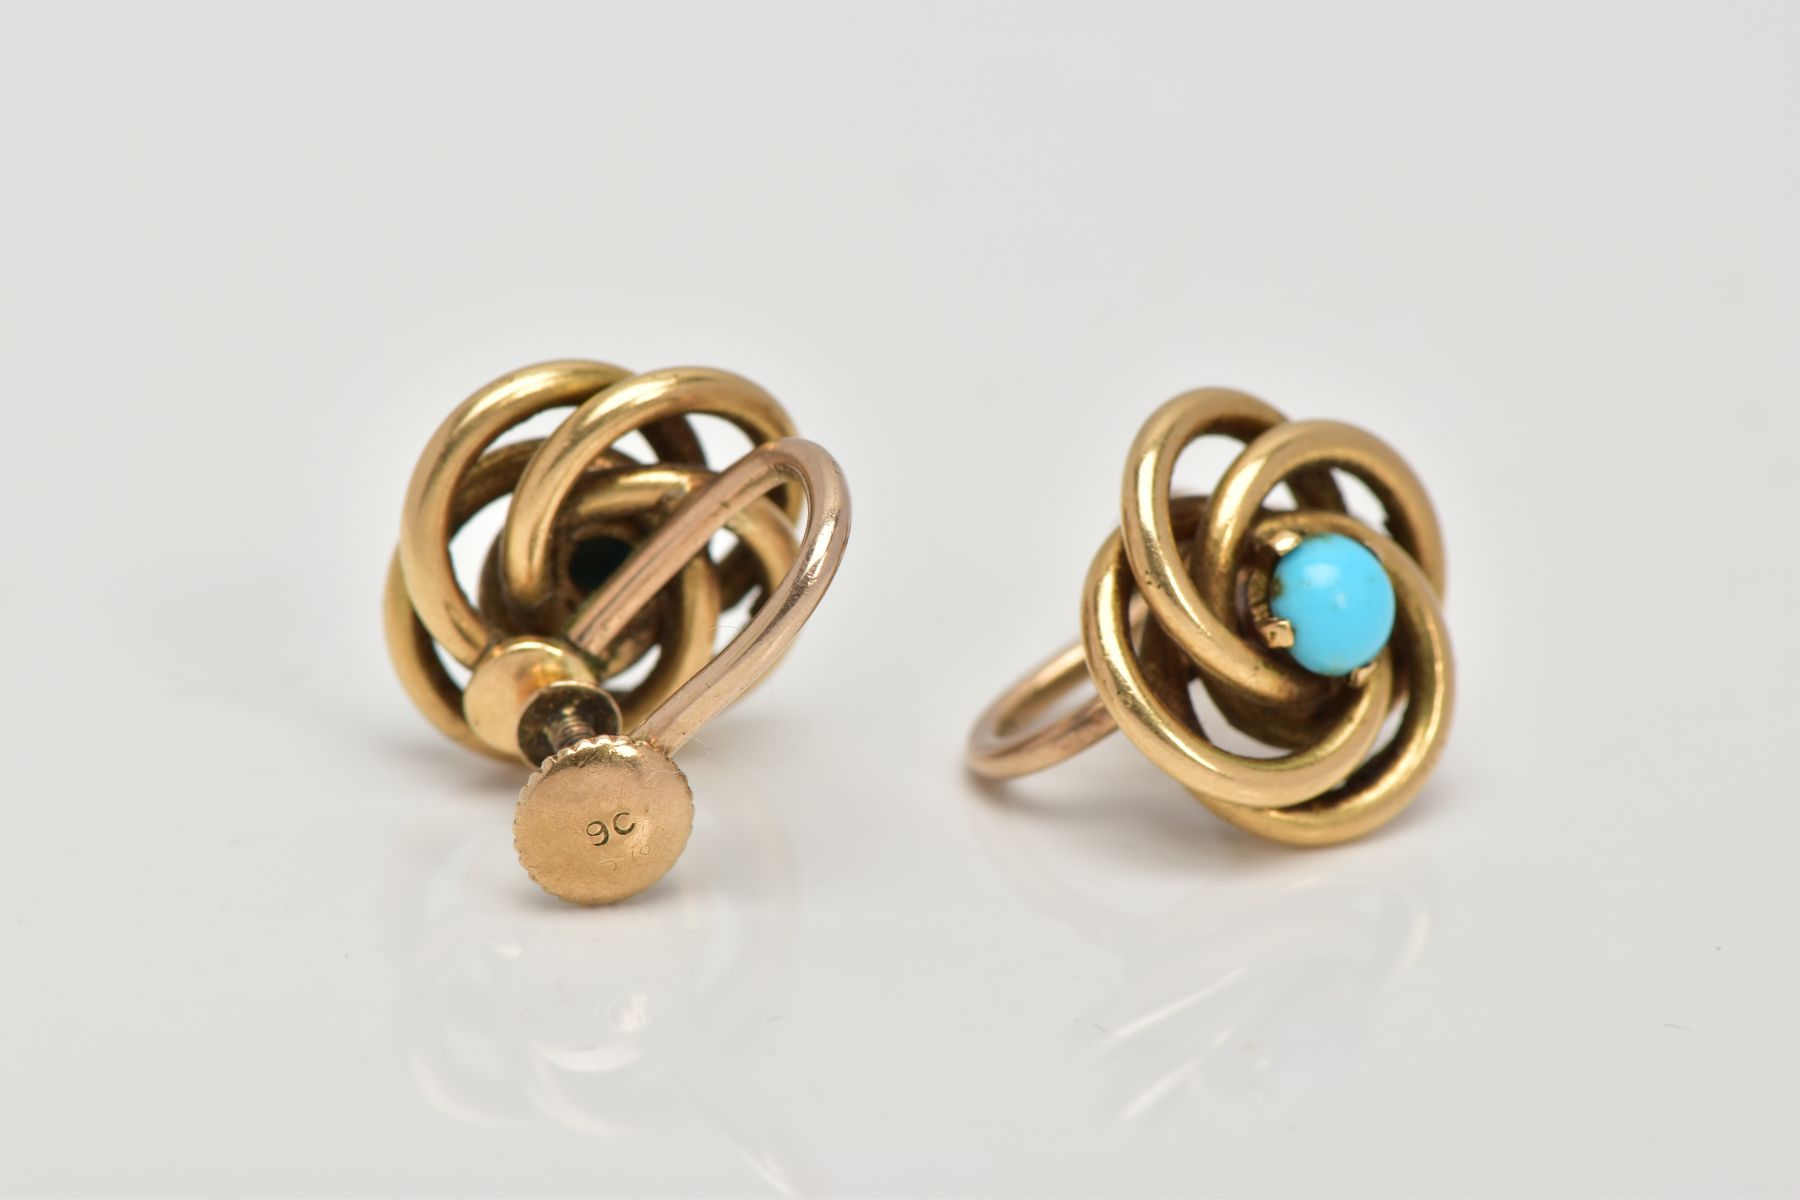 A PAIR OF EARRINGS, of interlocking circular design each set with a central turquoise cabochon, with - Image 3 of 3